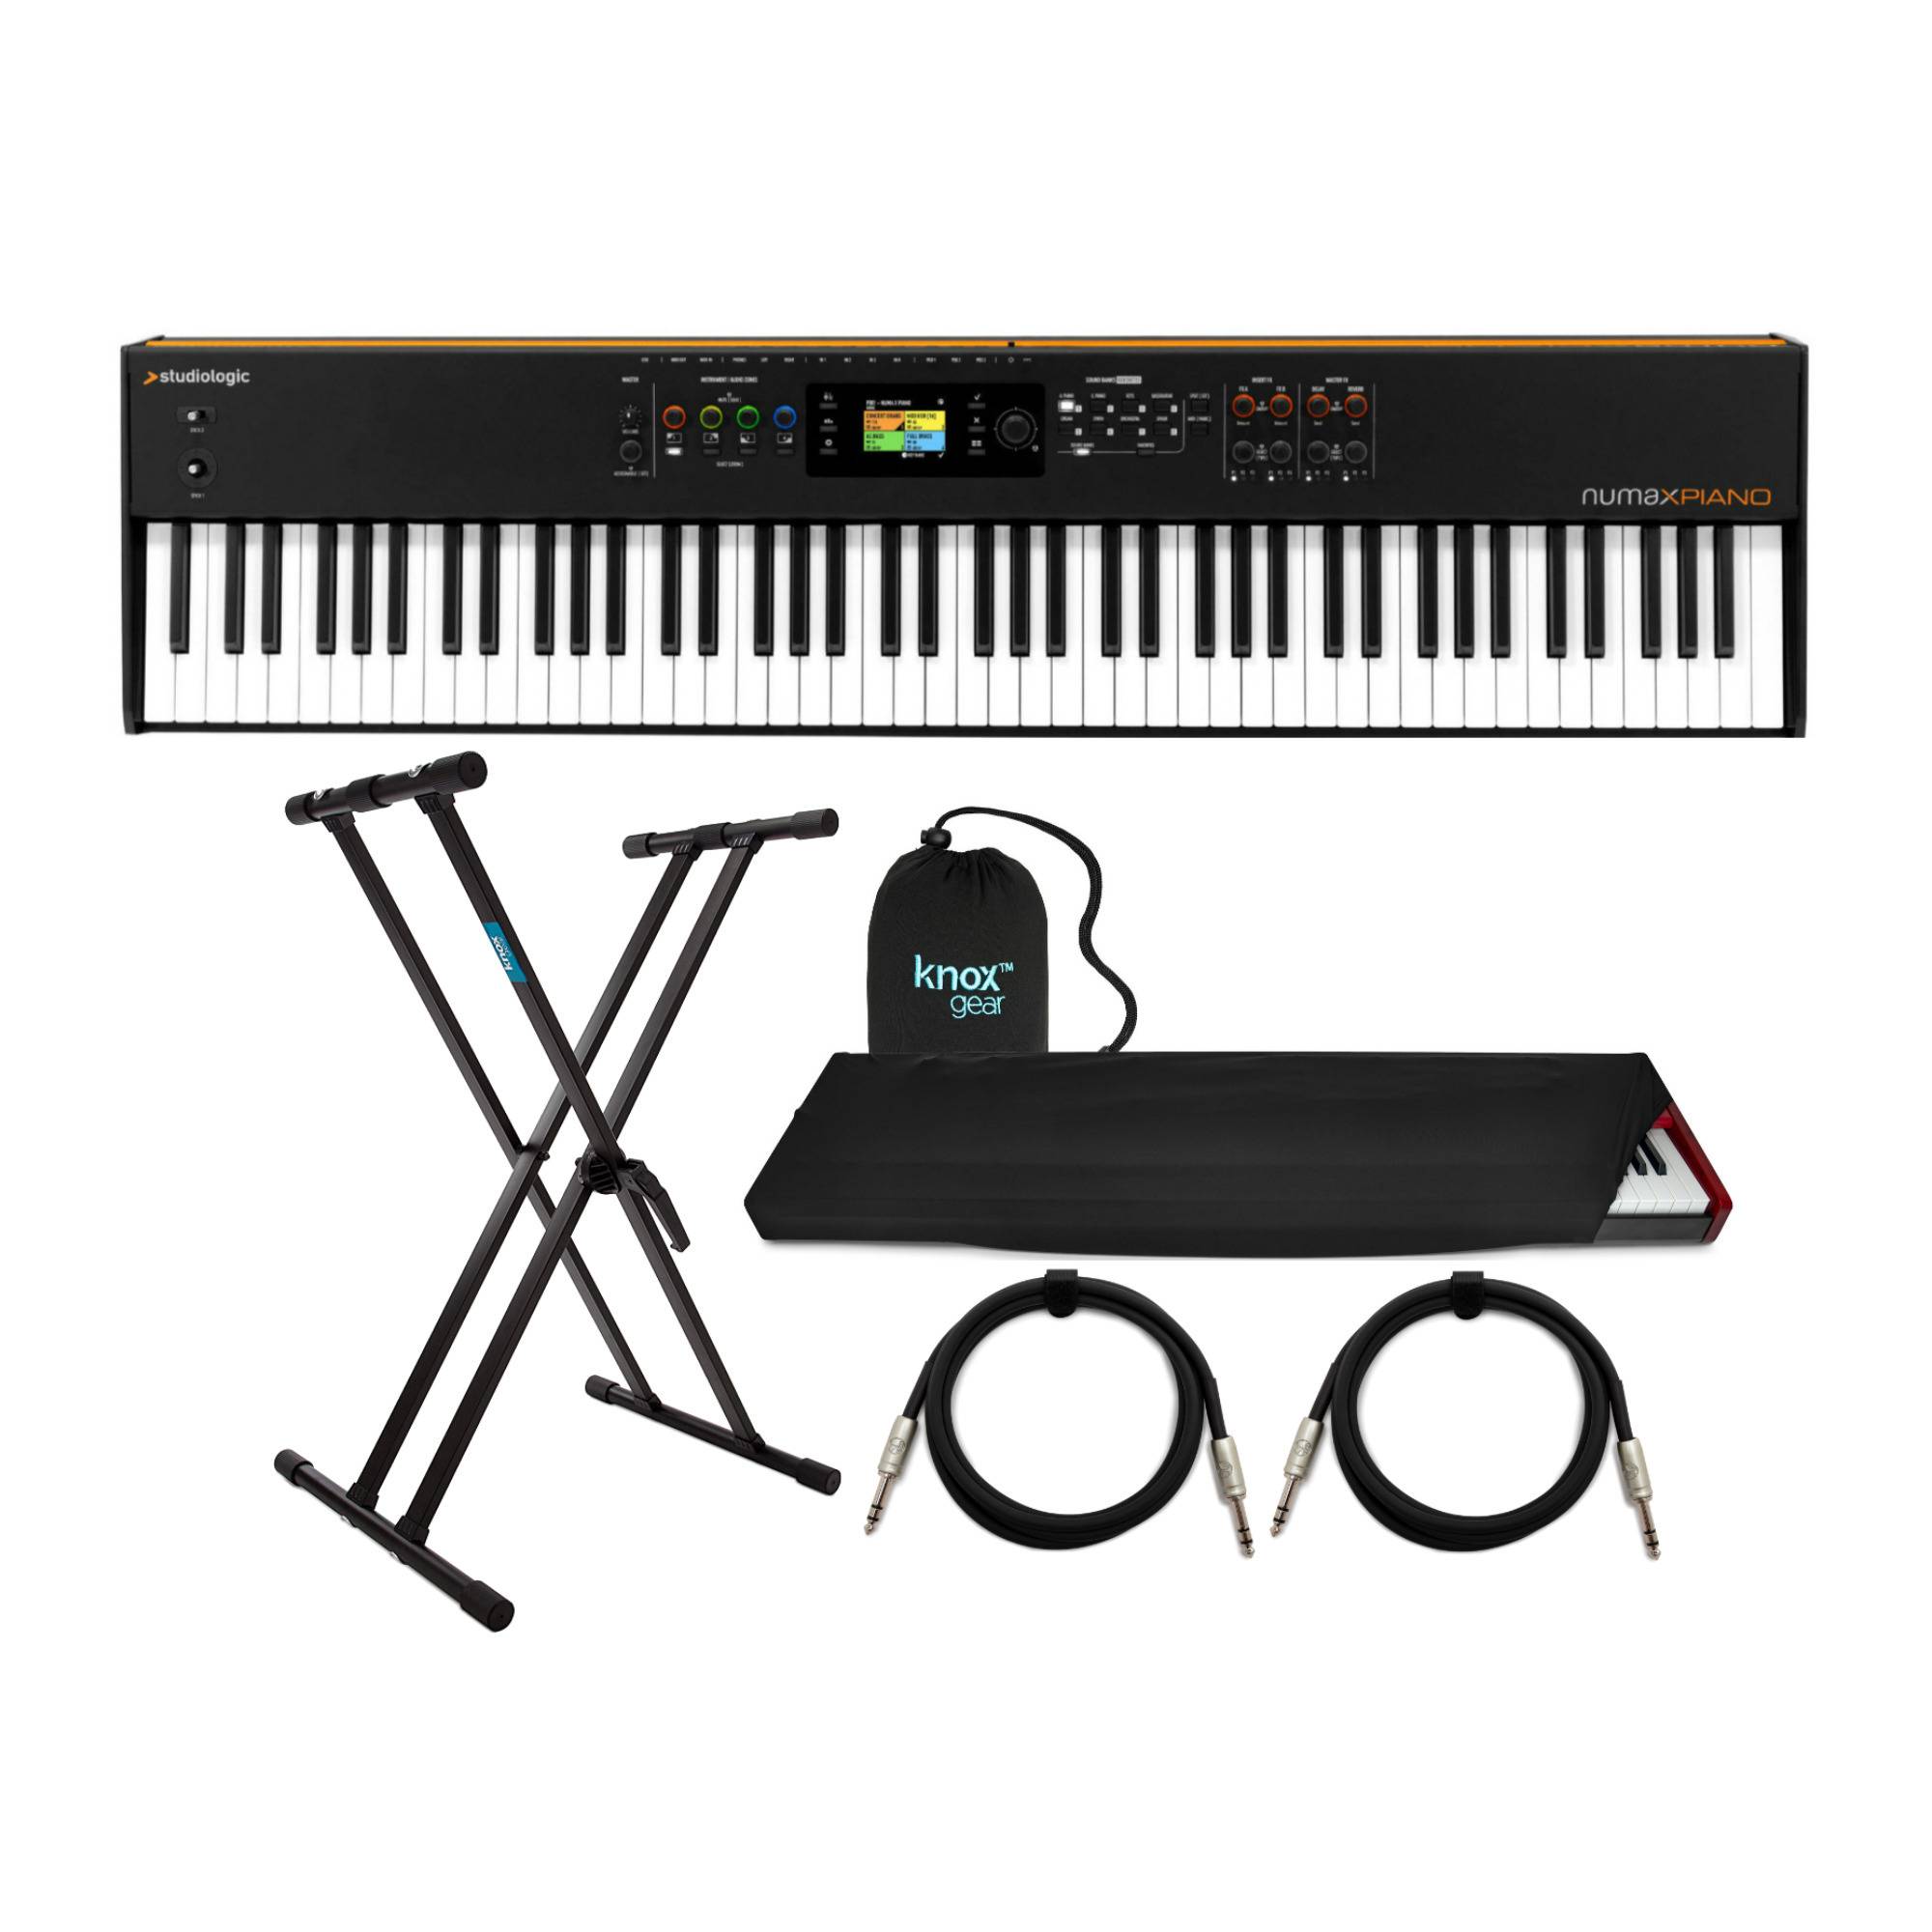 Studiologic Numa X Piano 88 Digital Piano with Hammer-Action Keys Bundle with Keyboard Stand